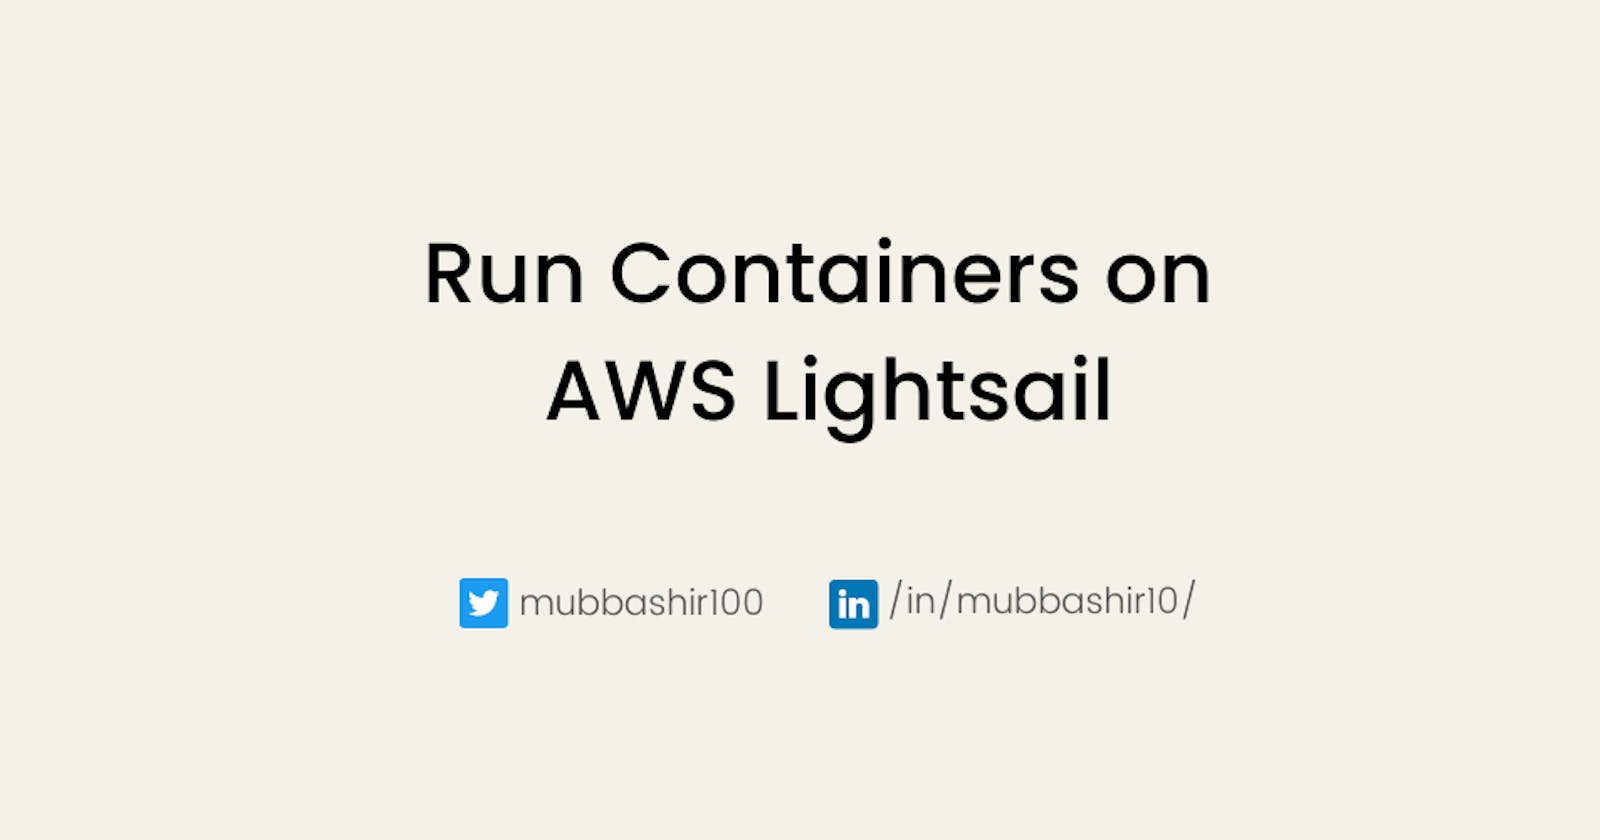 Run Containers on AWS Lightsail